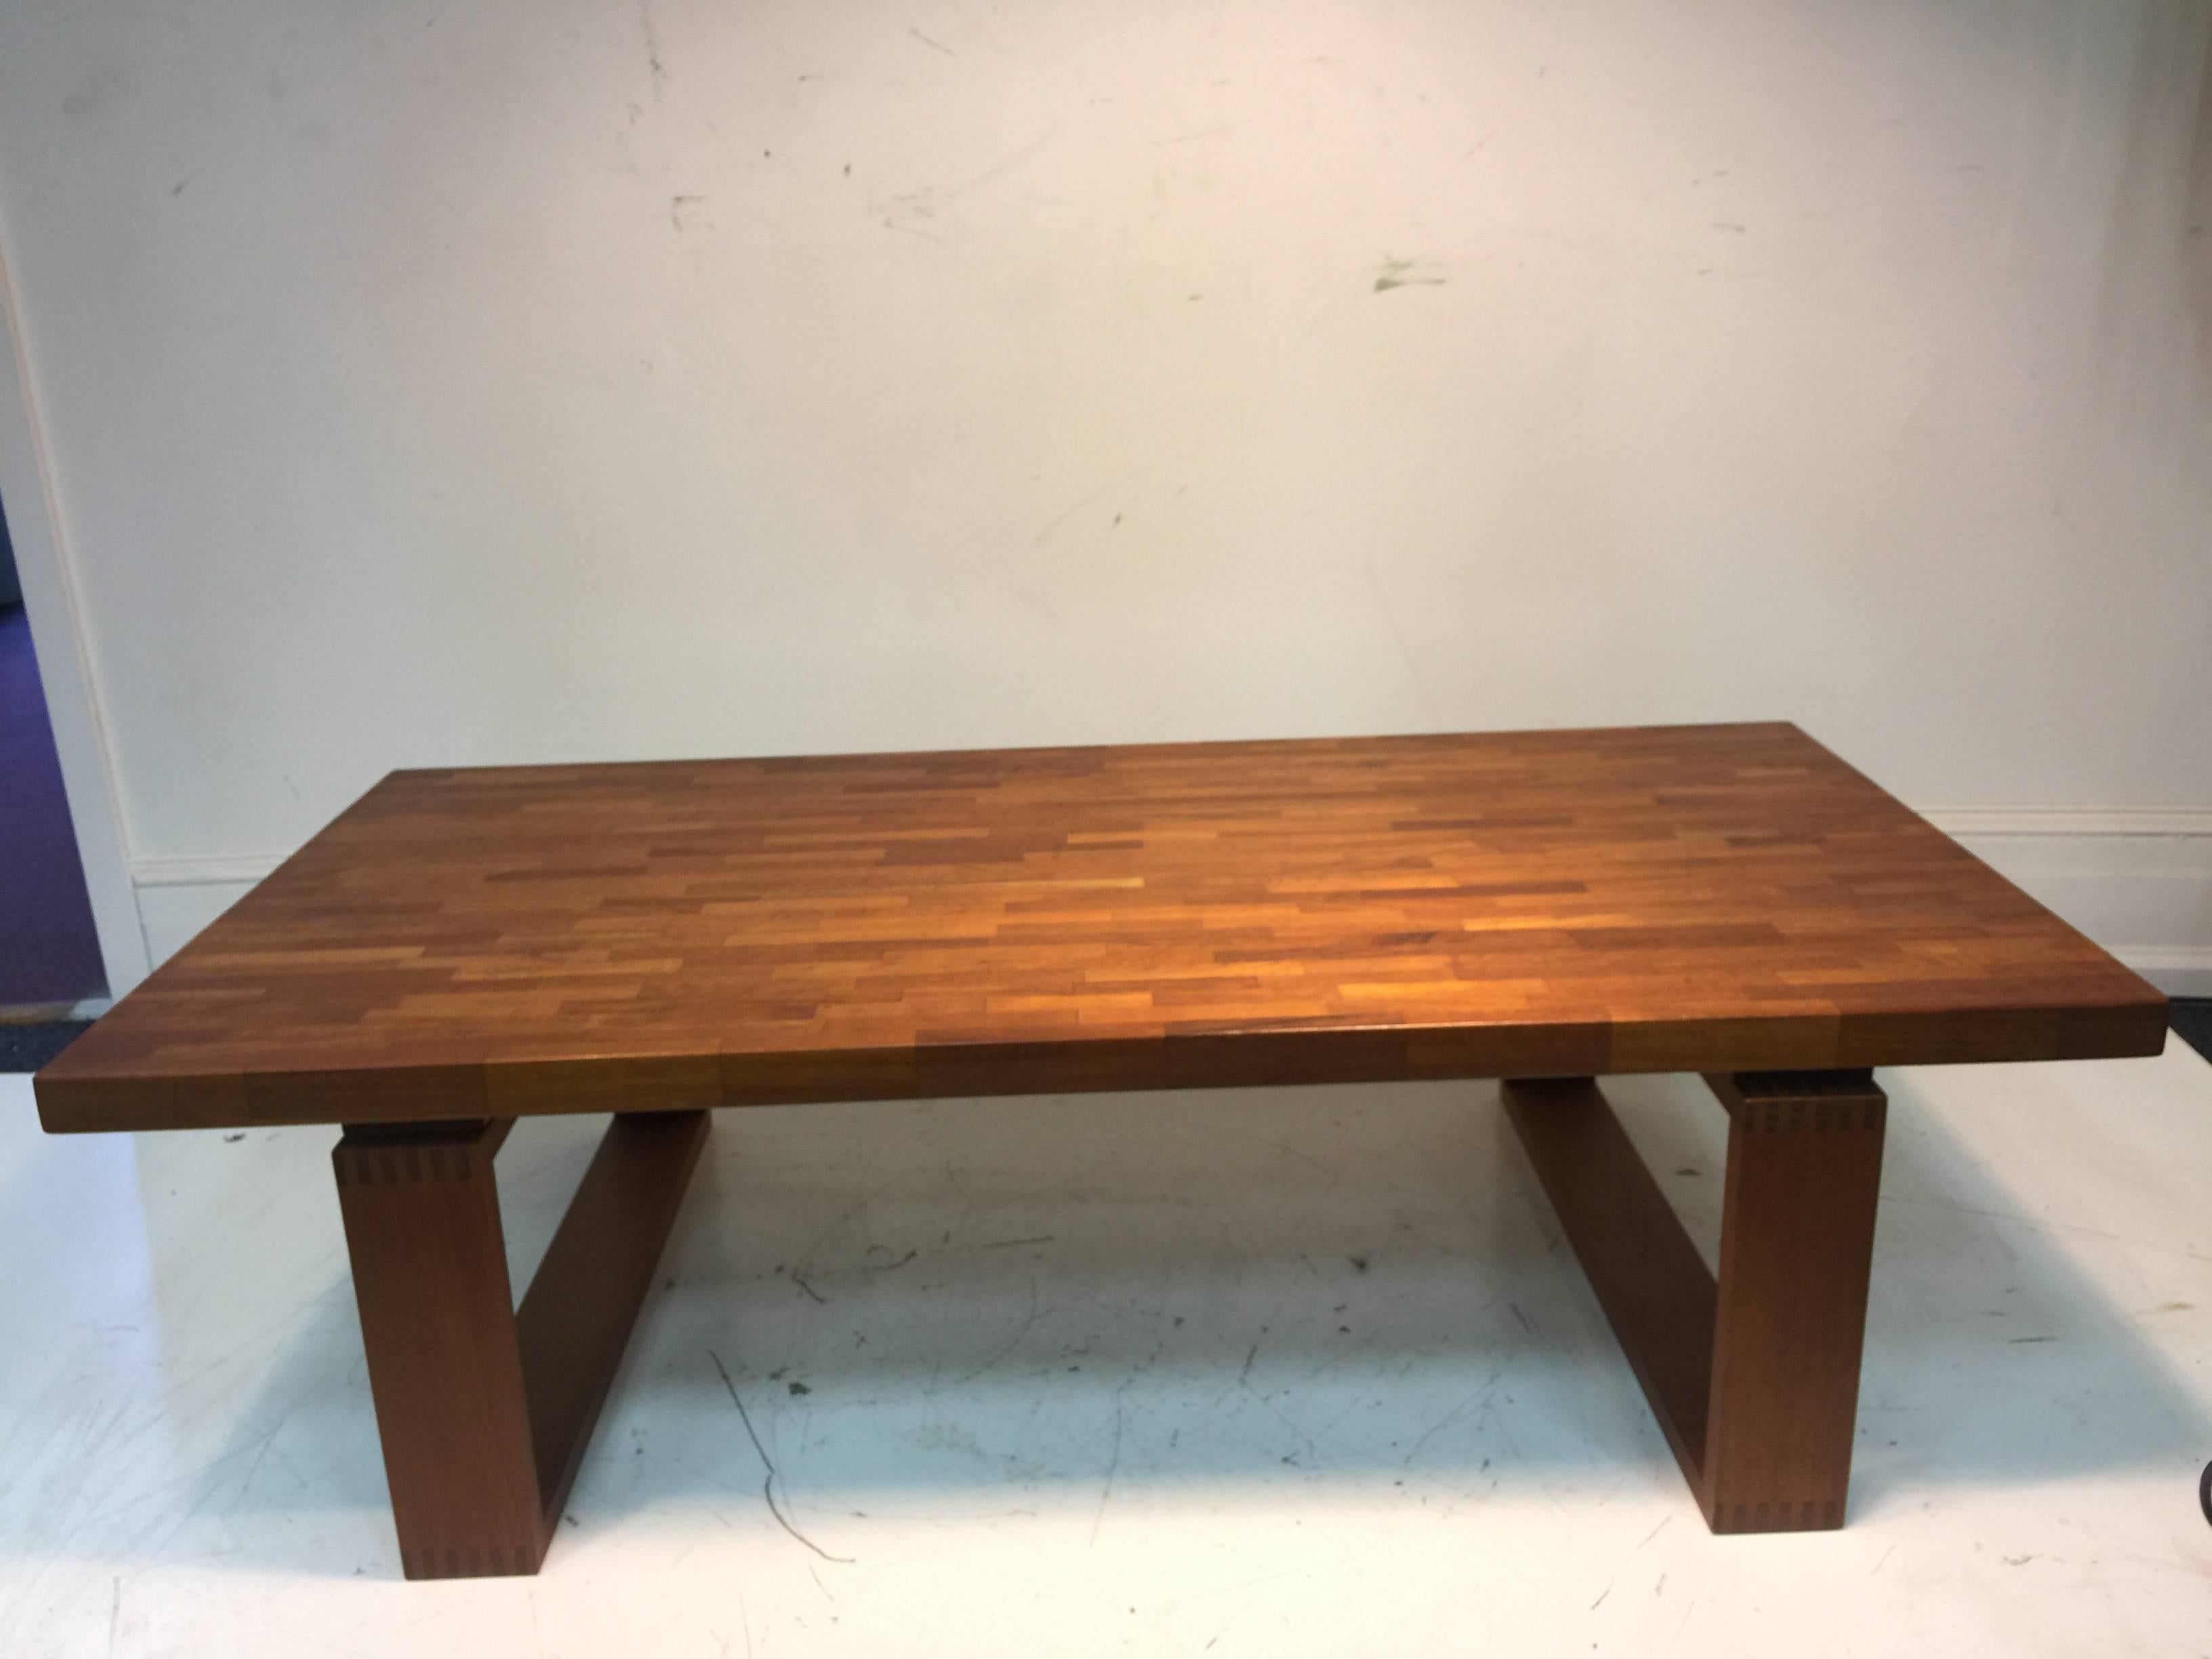 A terrific Scandinavian Modern bench or coffee table in the manner of Norwegian designer Torbjorn Afdal, circa 1970. Good vintage condition with age appropriate wear.